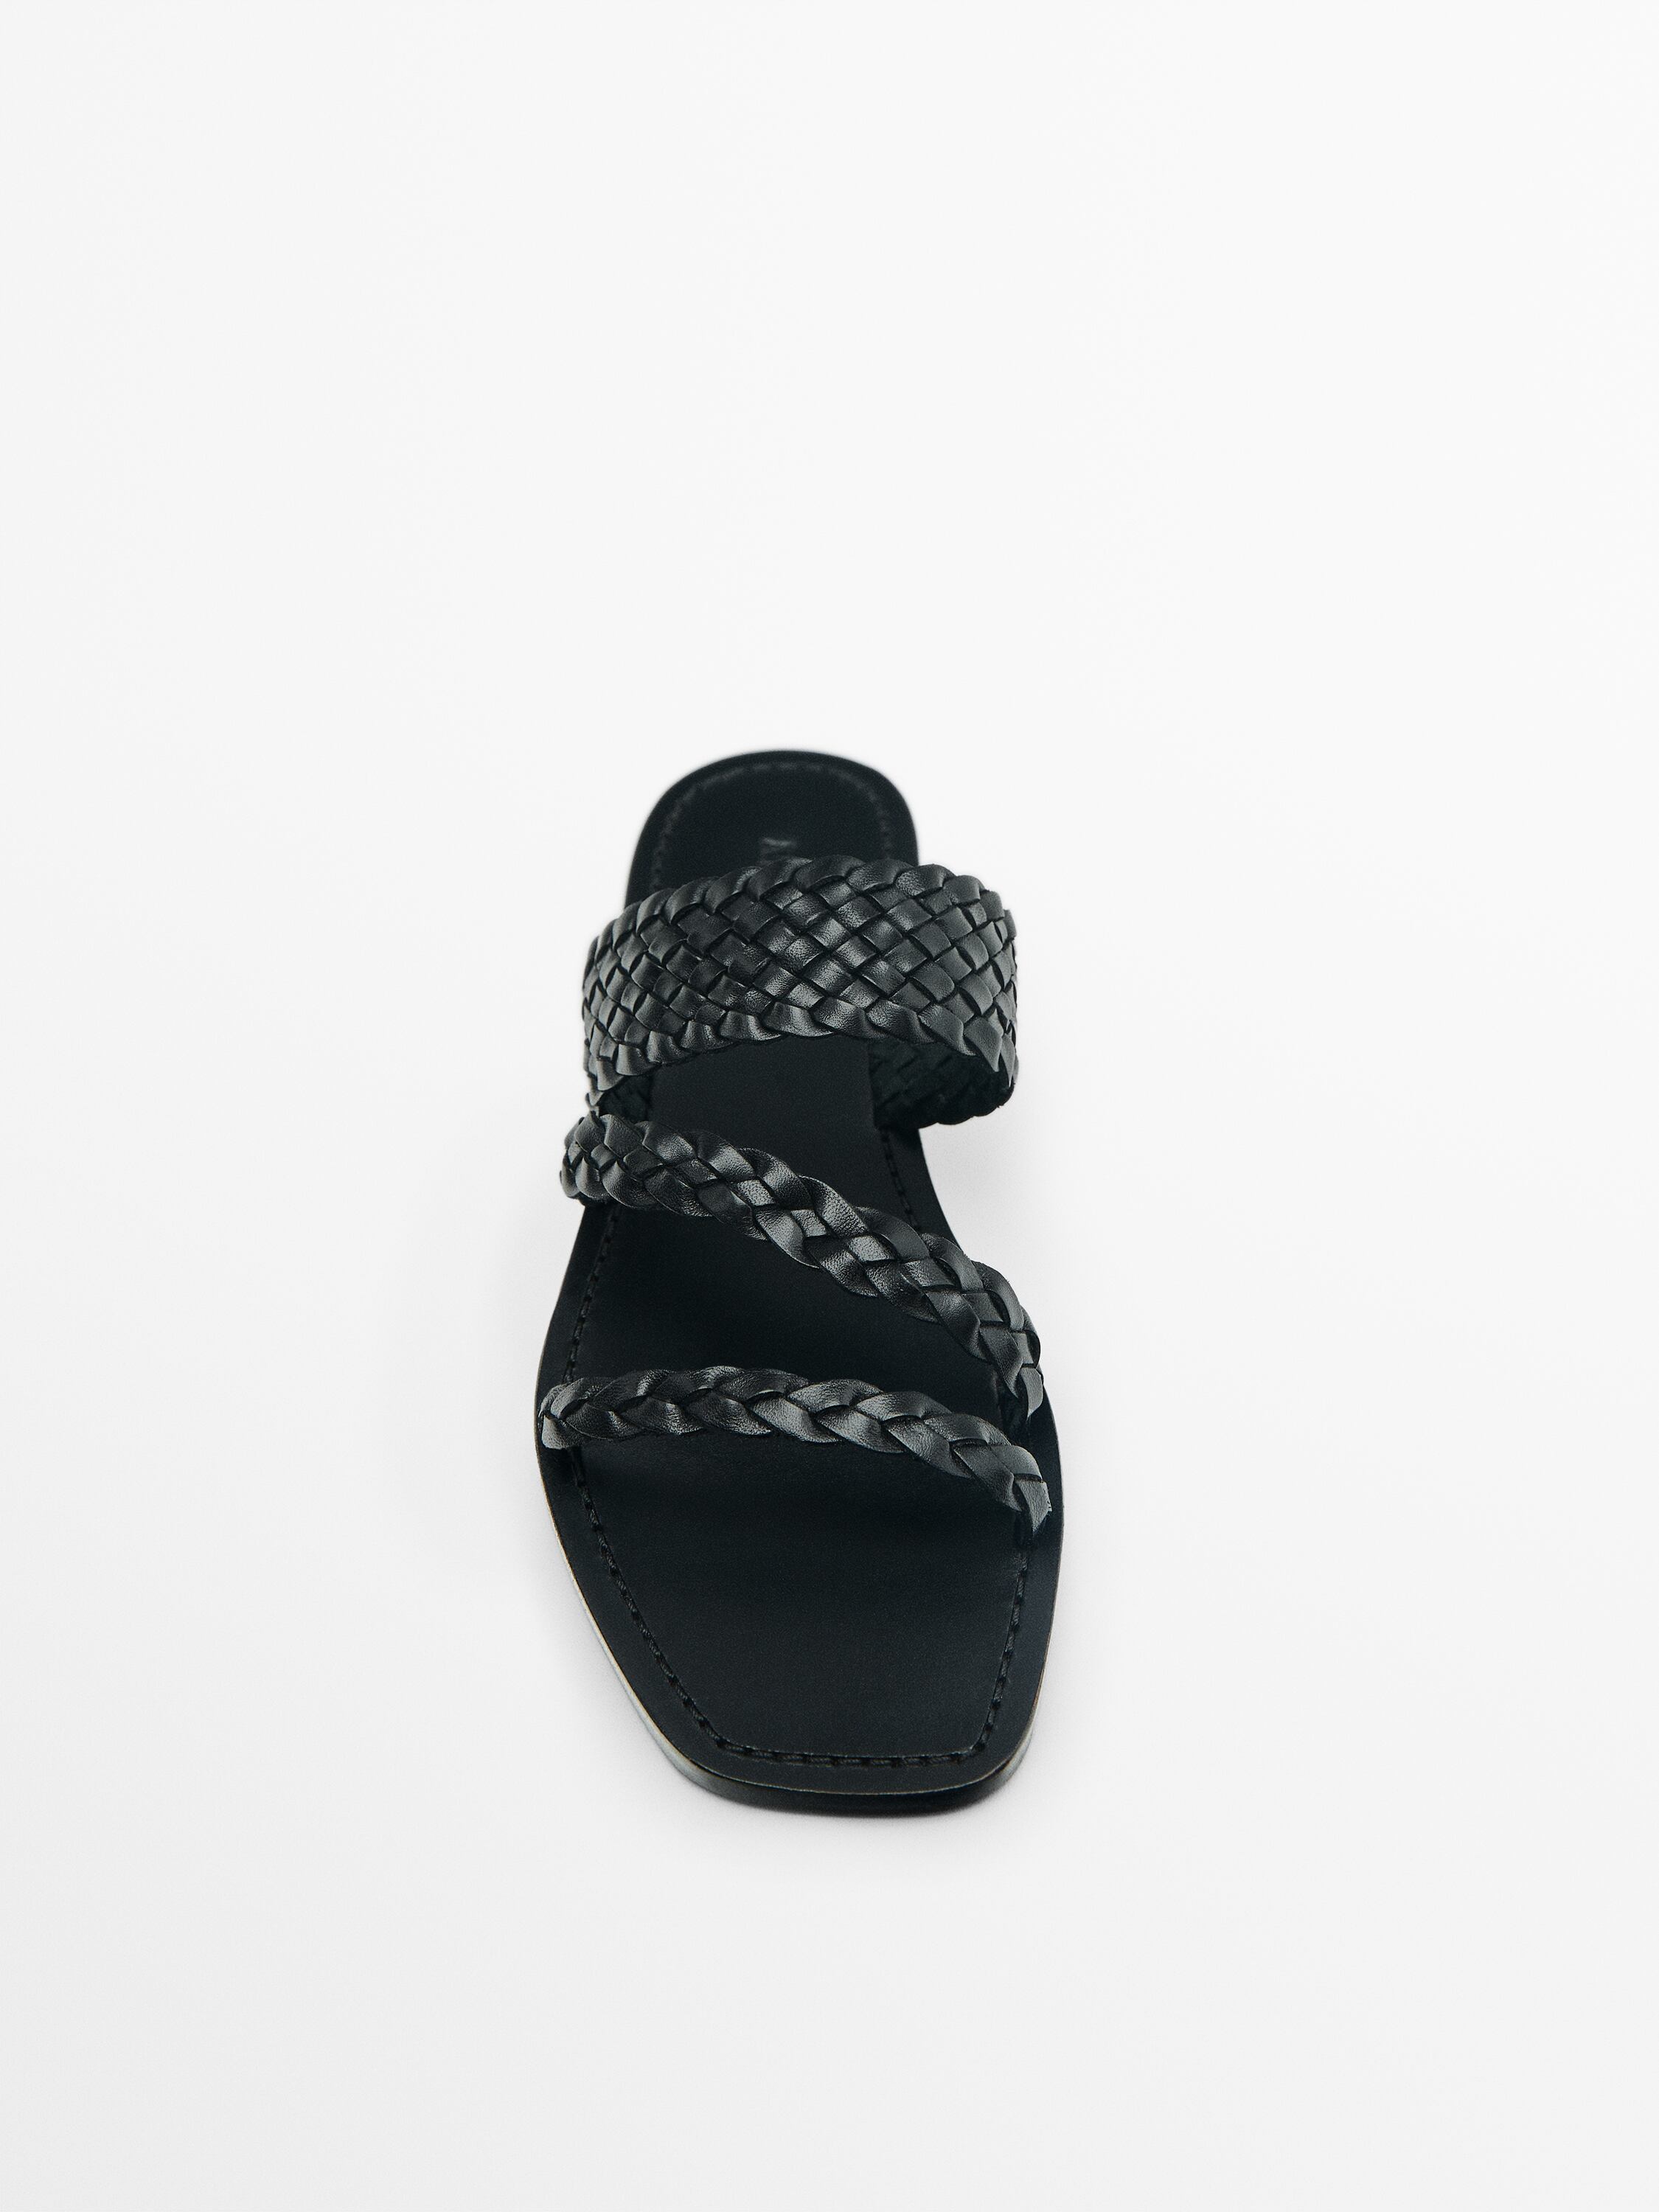 Flat slider sandals with woven straps